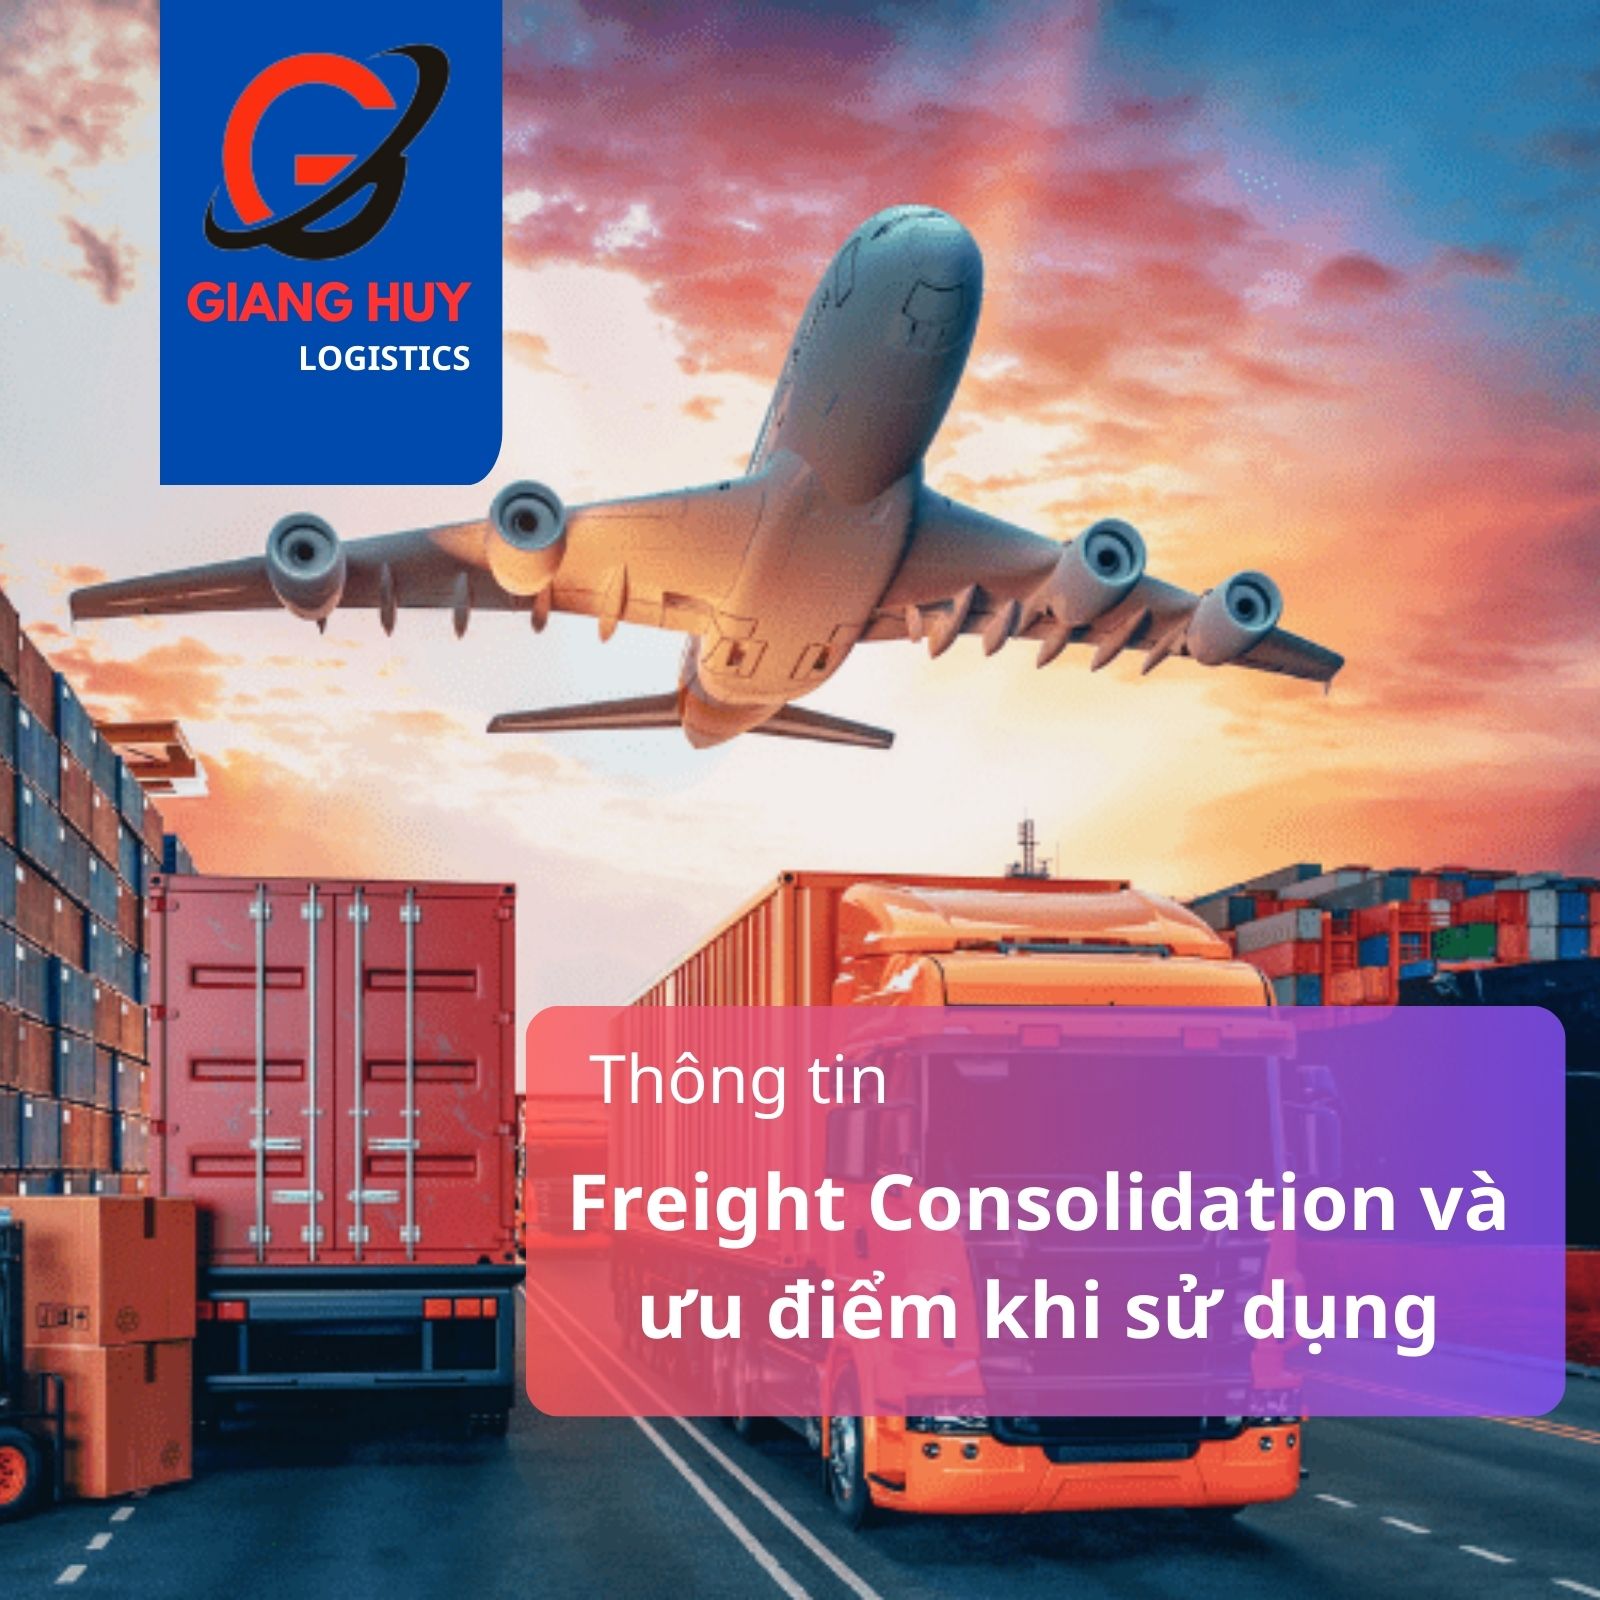 Freight Consolidation